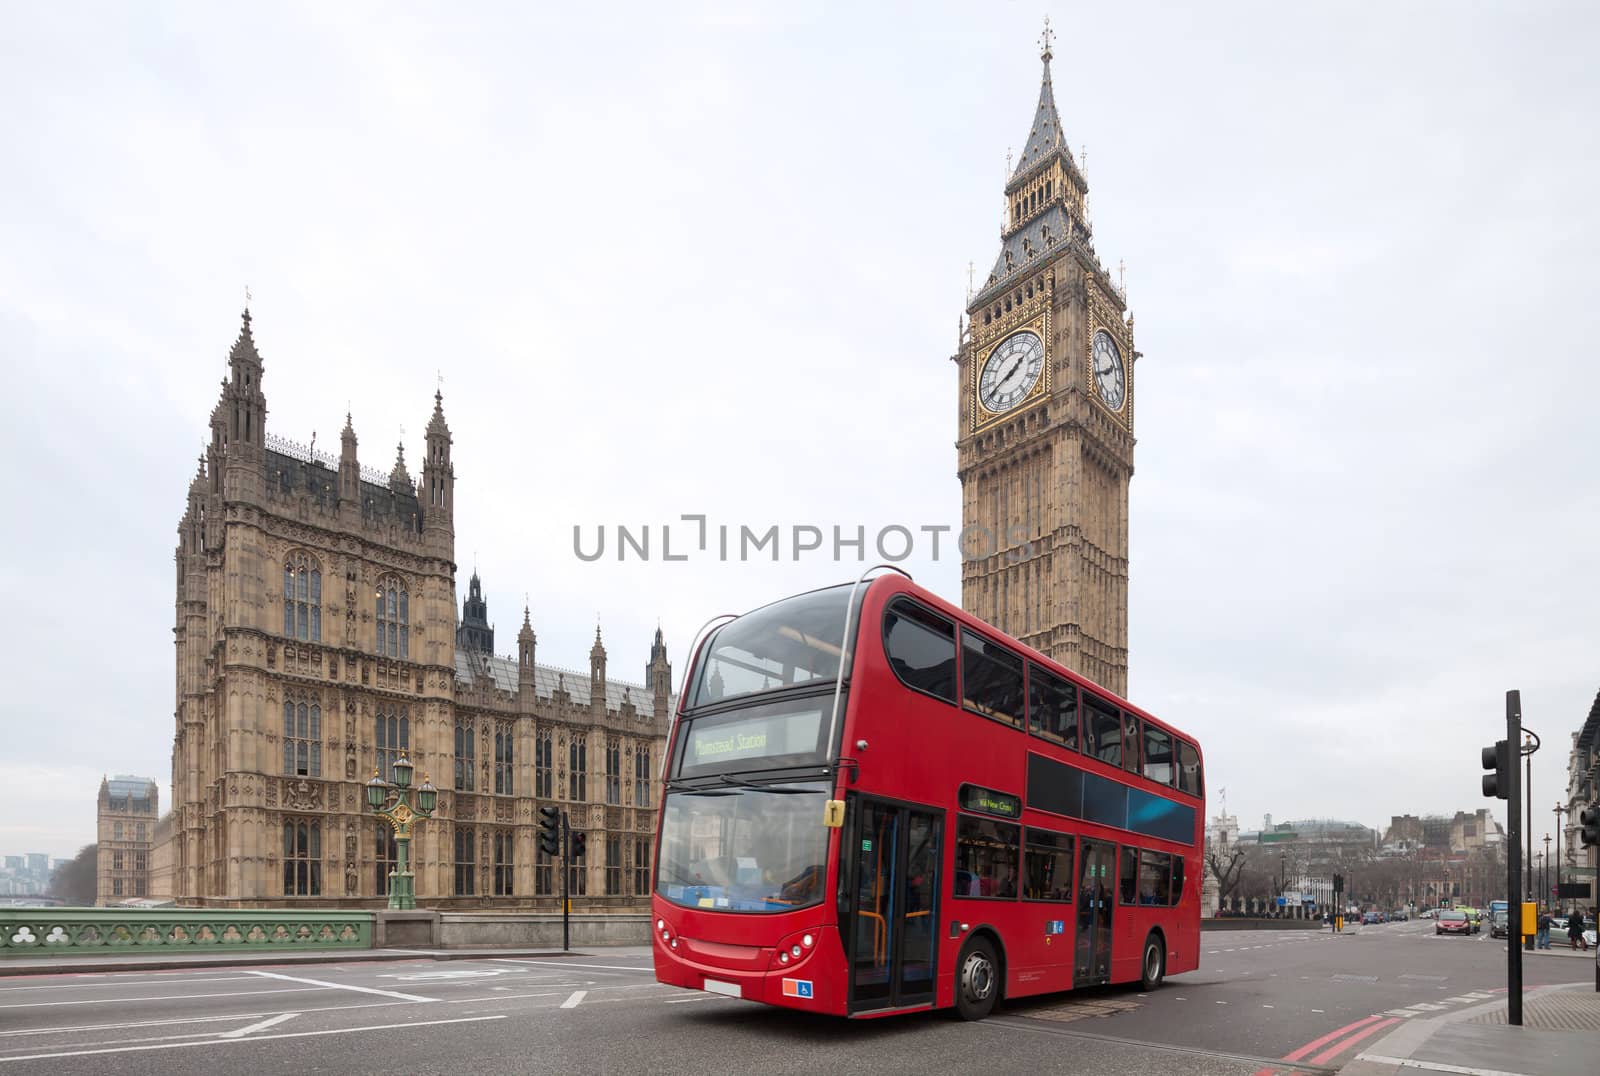 Big Ben with red double-decker in London, UK. Cityscape  shot with tilt-shift lens maintaining verticals